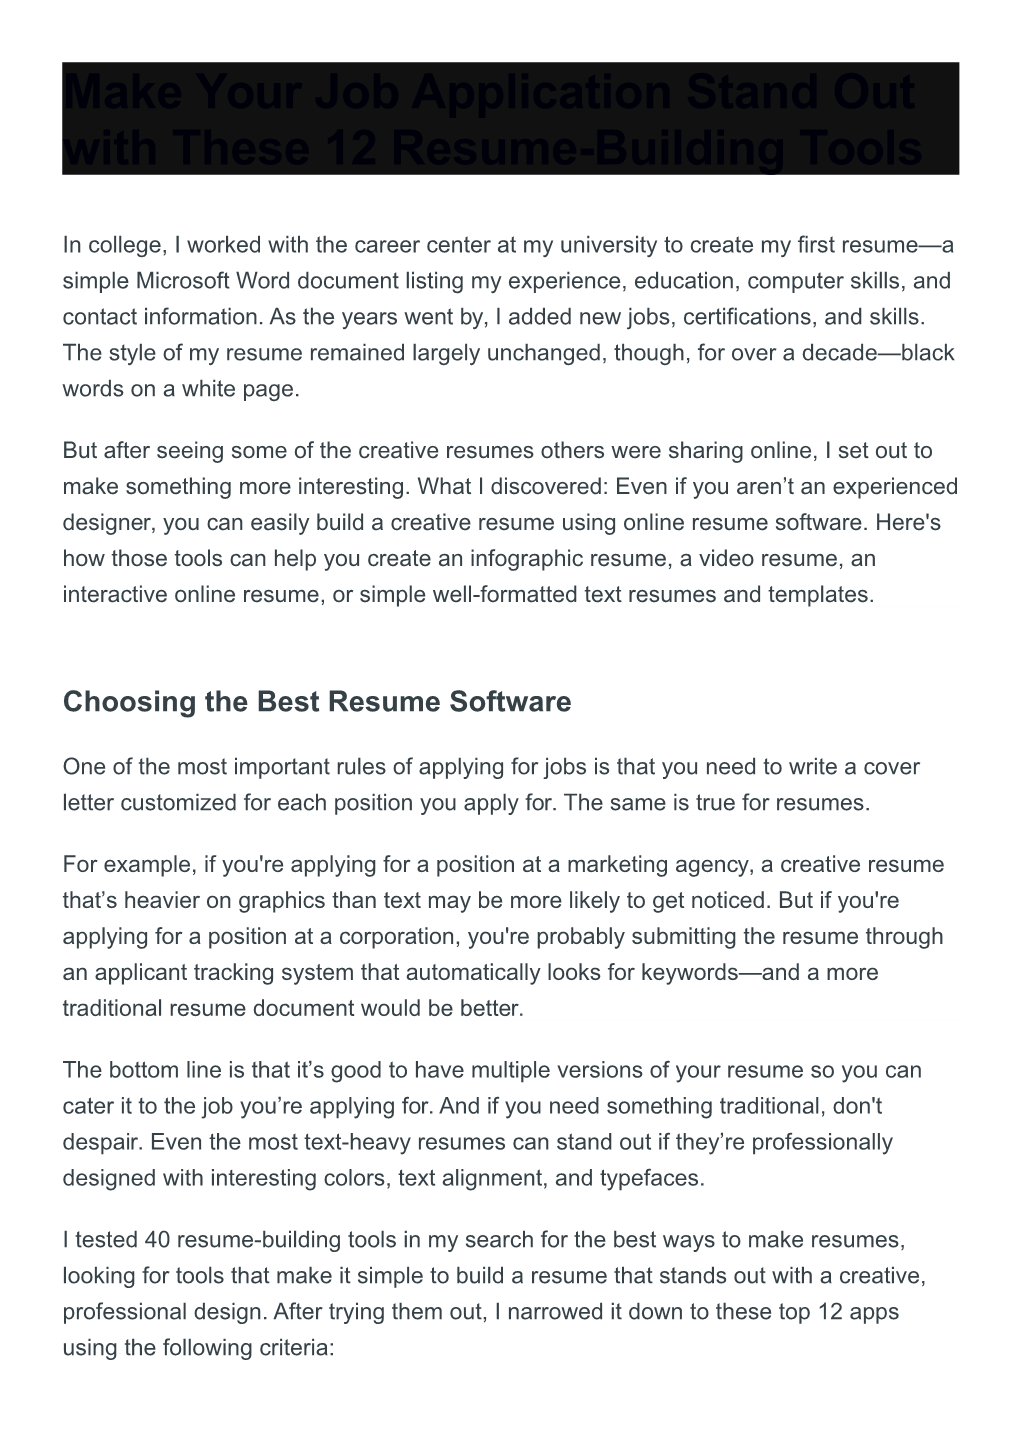 Make Your Job Application Stand out with These 12 Resume-Building Tools